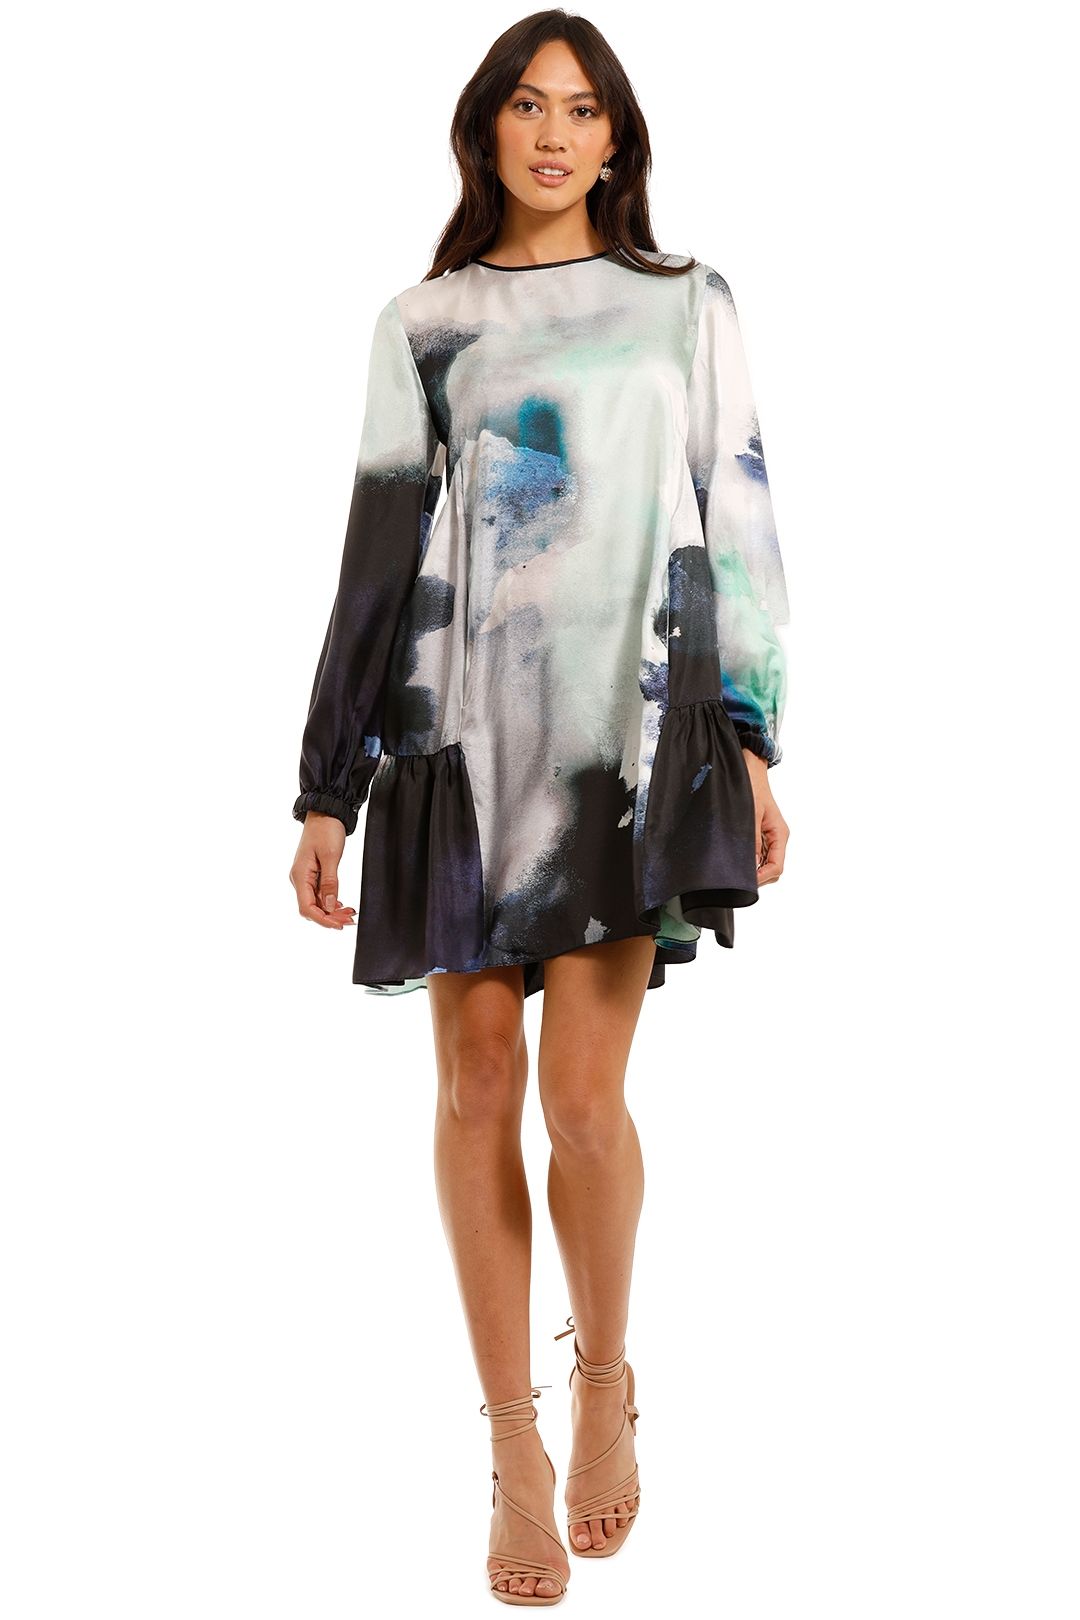 Ginger and Smart Vapour Dress Tie Dye Print